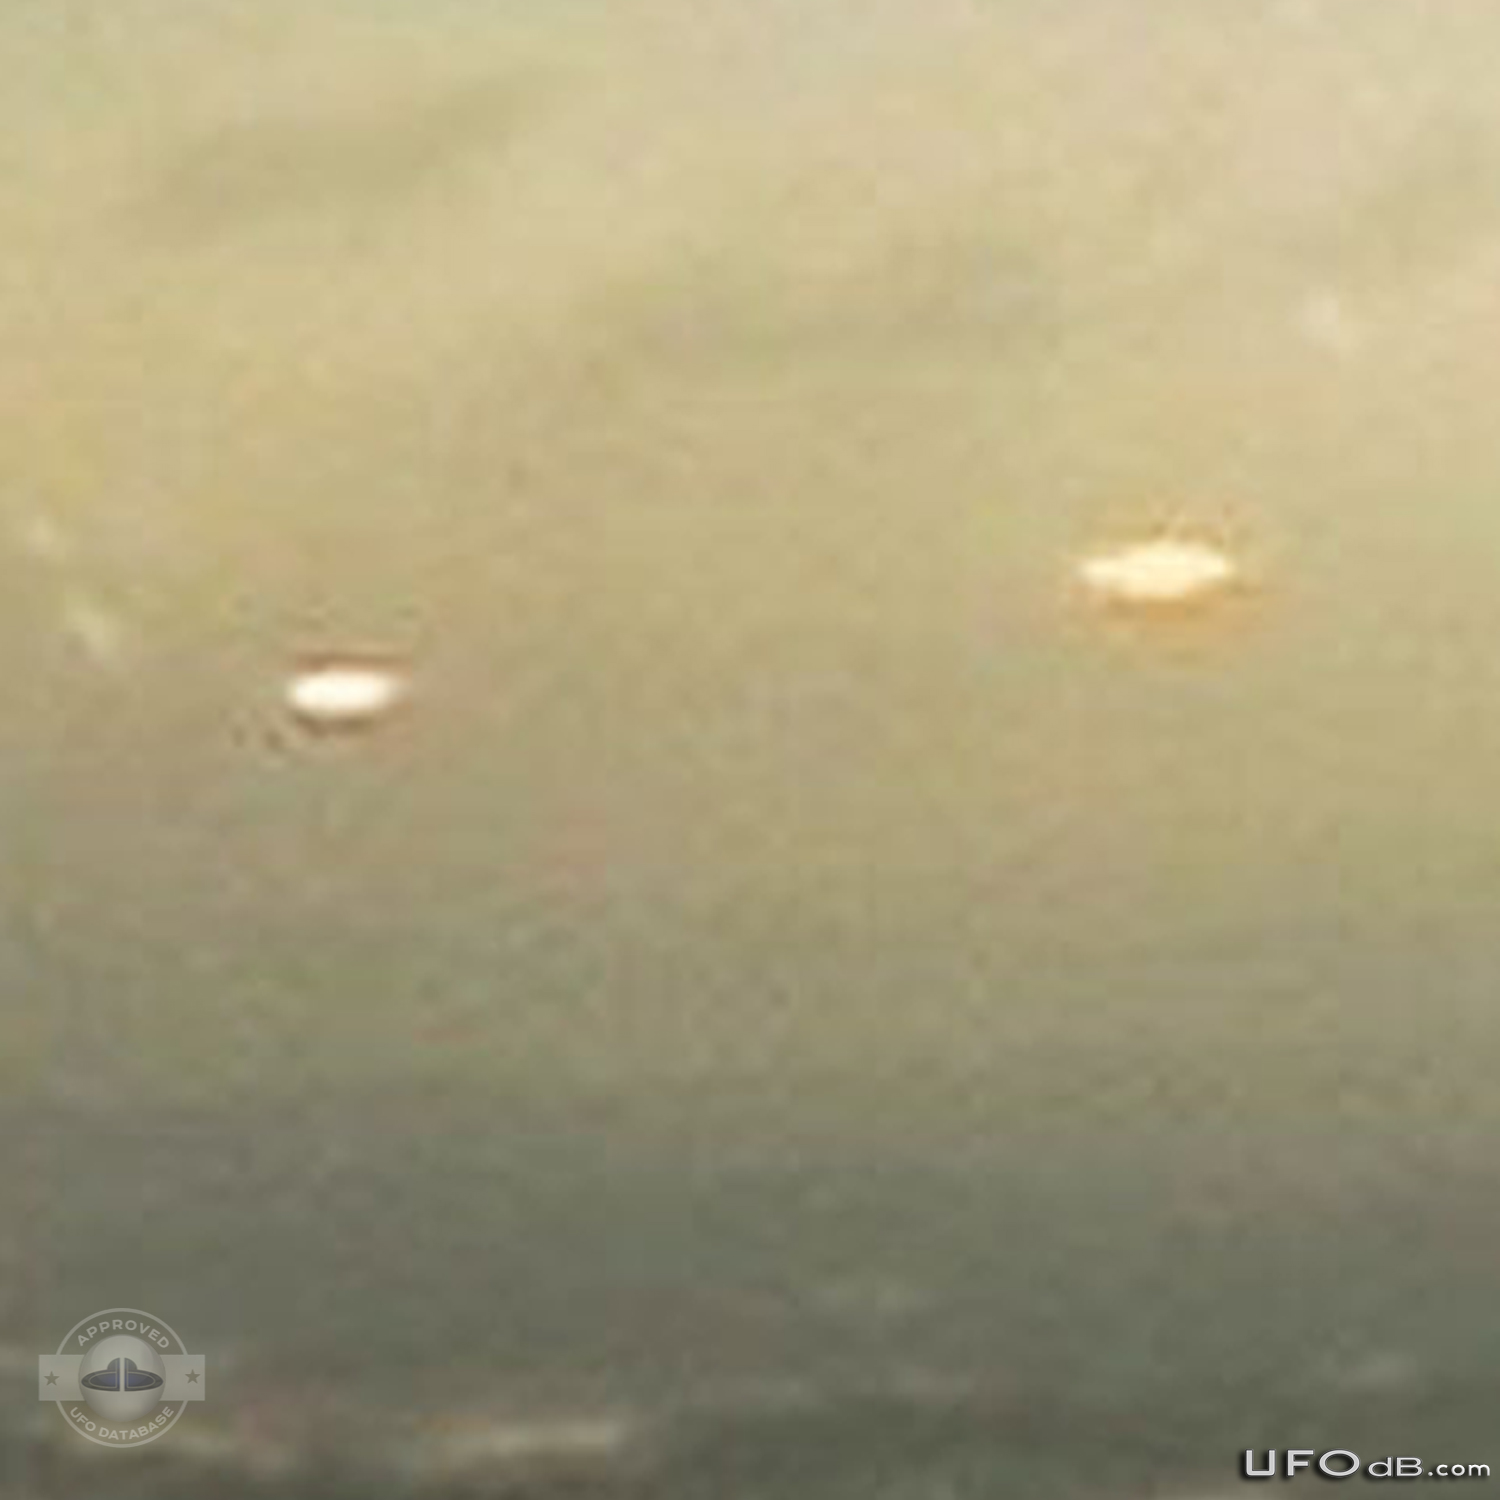 Sunrise reveals a fleet of cloaked UFOs in Chiba, Japan | January 2011 UFO Picture #244-4